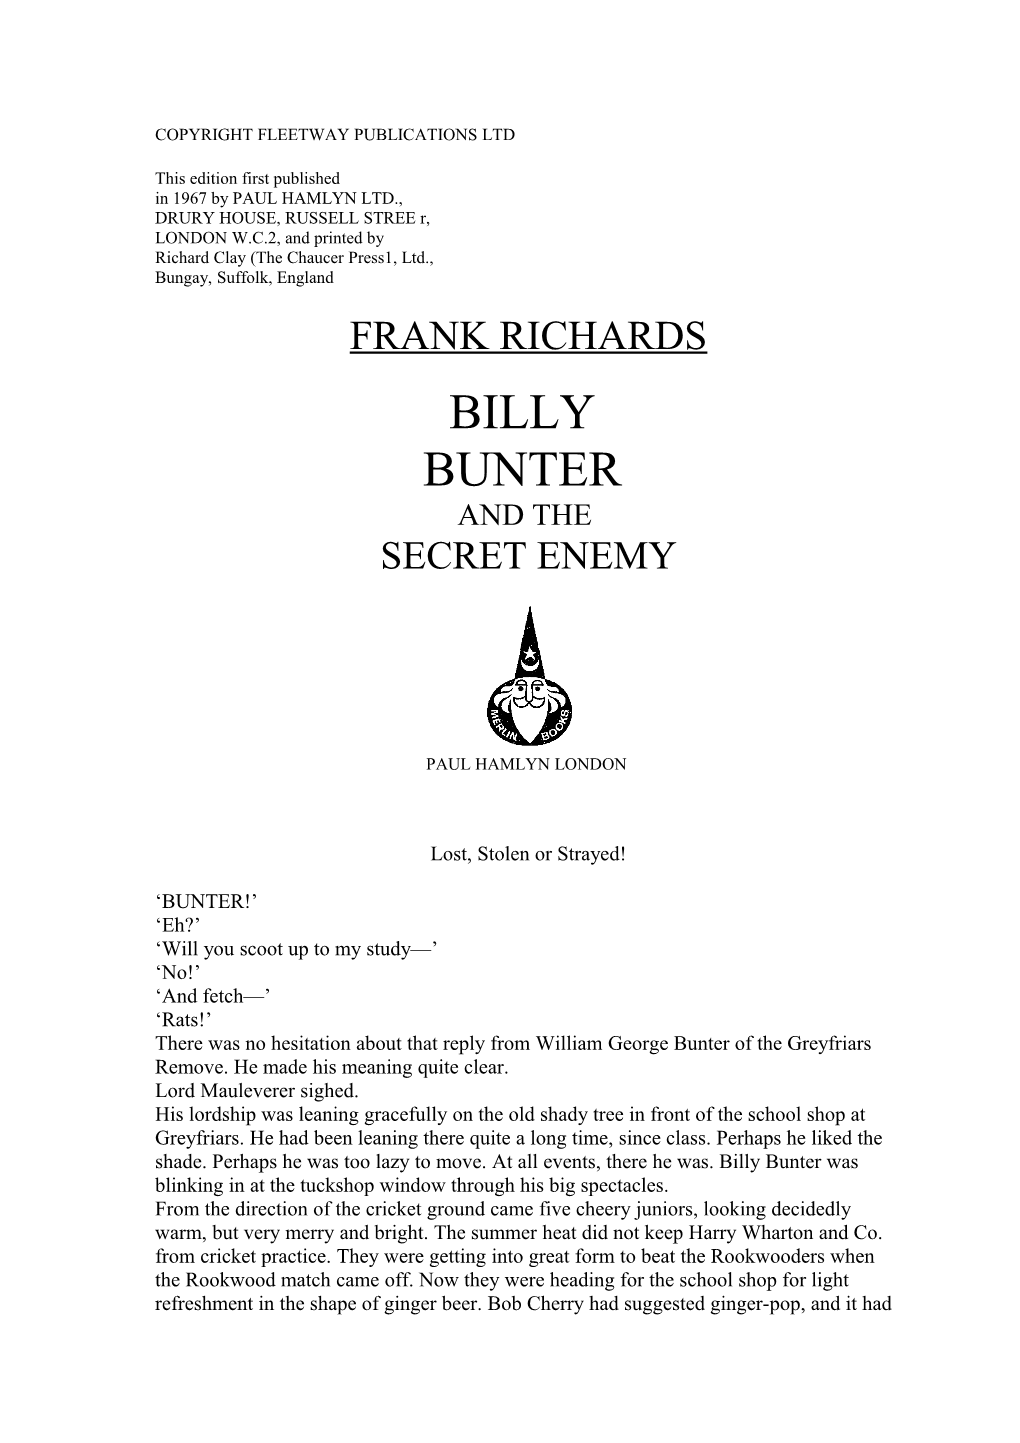 Billy Bunter and the Secret Enemy